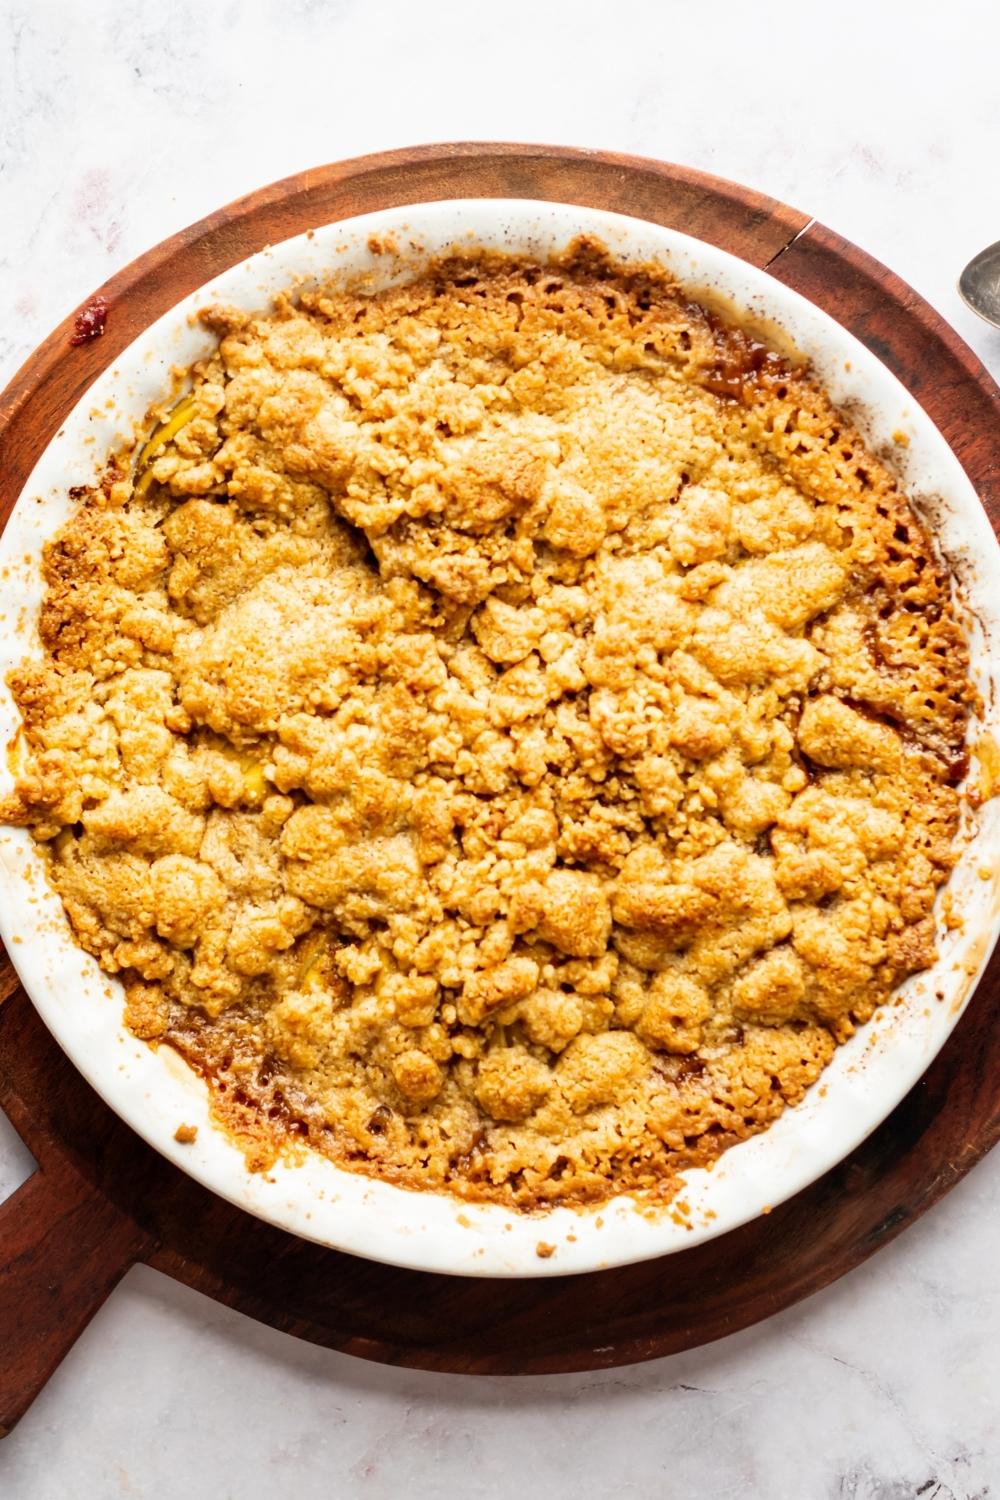 Apple crisp in a baking dish that is on top of a wooden cutting board.